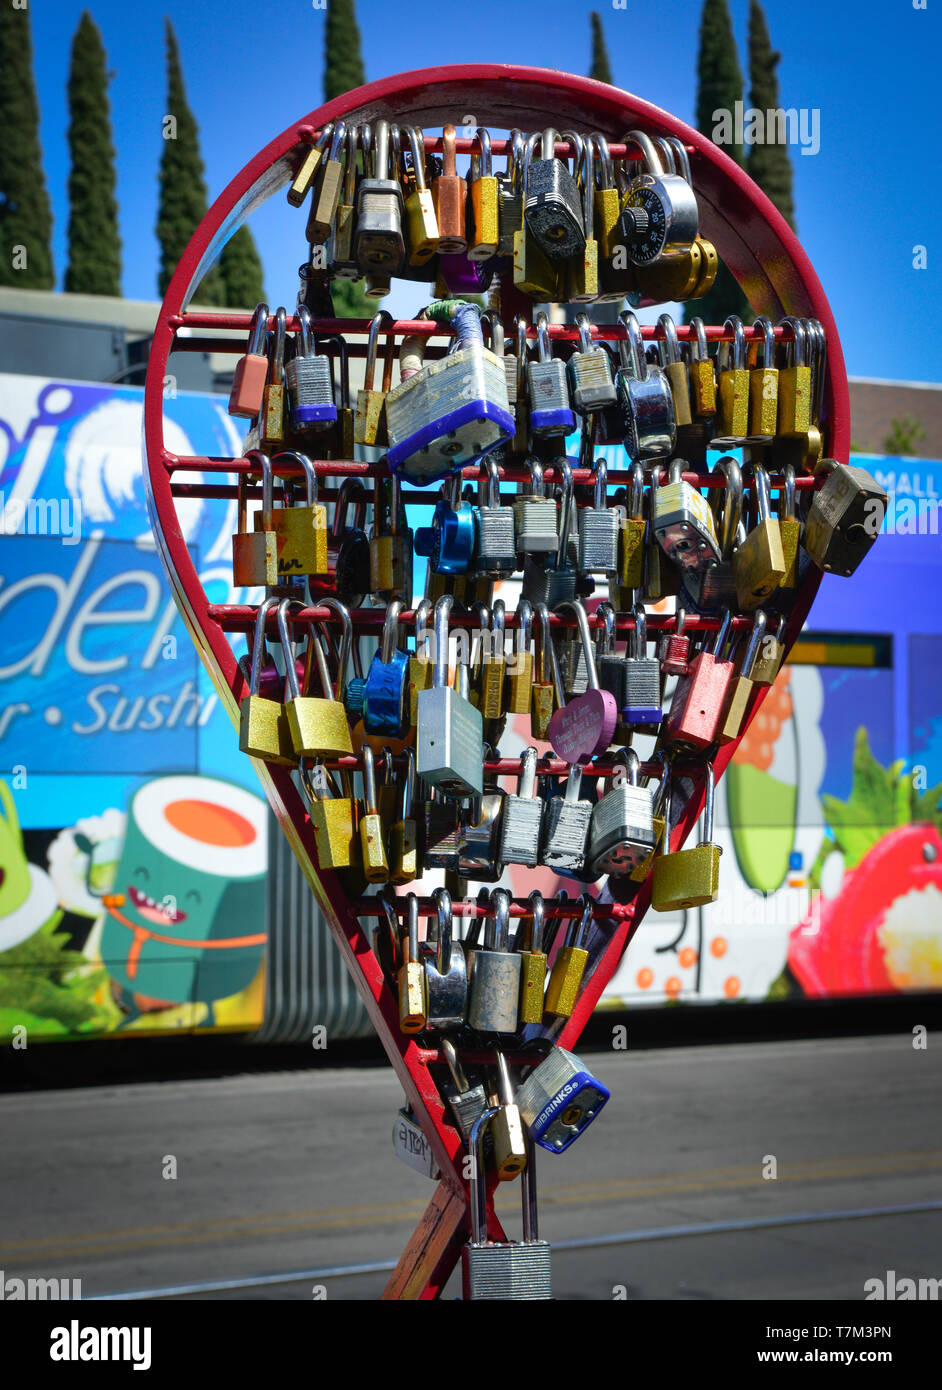 A collection of padlocks displayed on historic 4th Avenue are known worldwide as Love locks, symbolizing unbreakable love, in Tucson, AZ Stock Photo